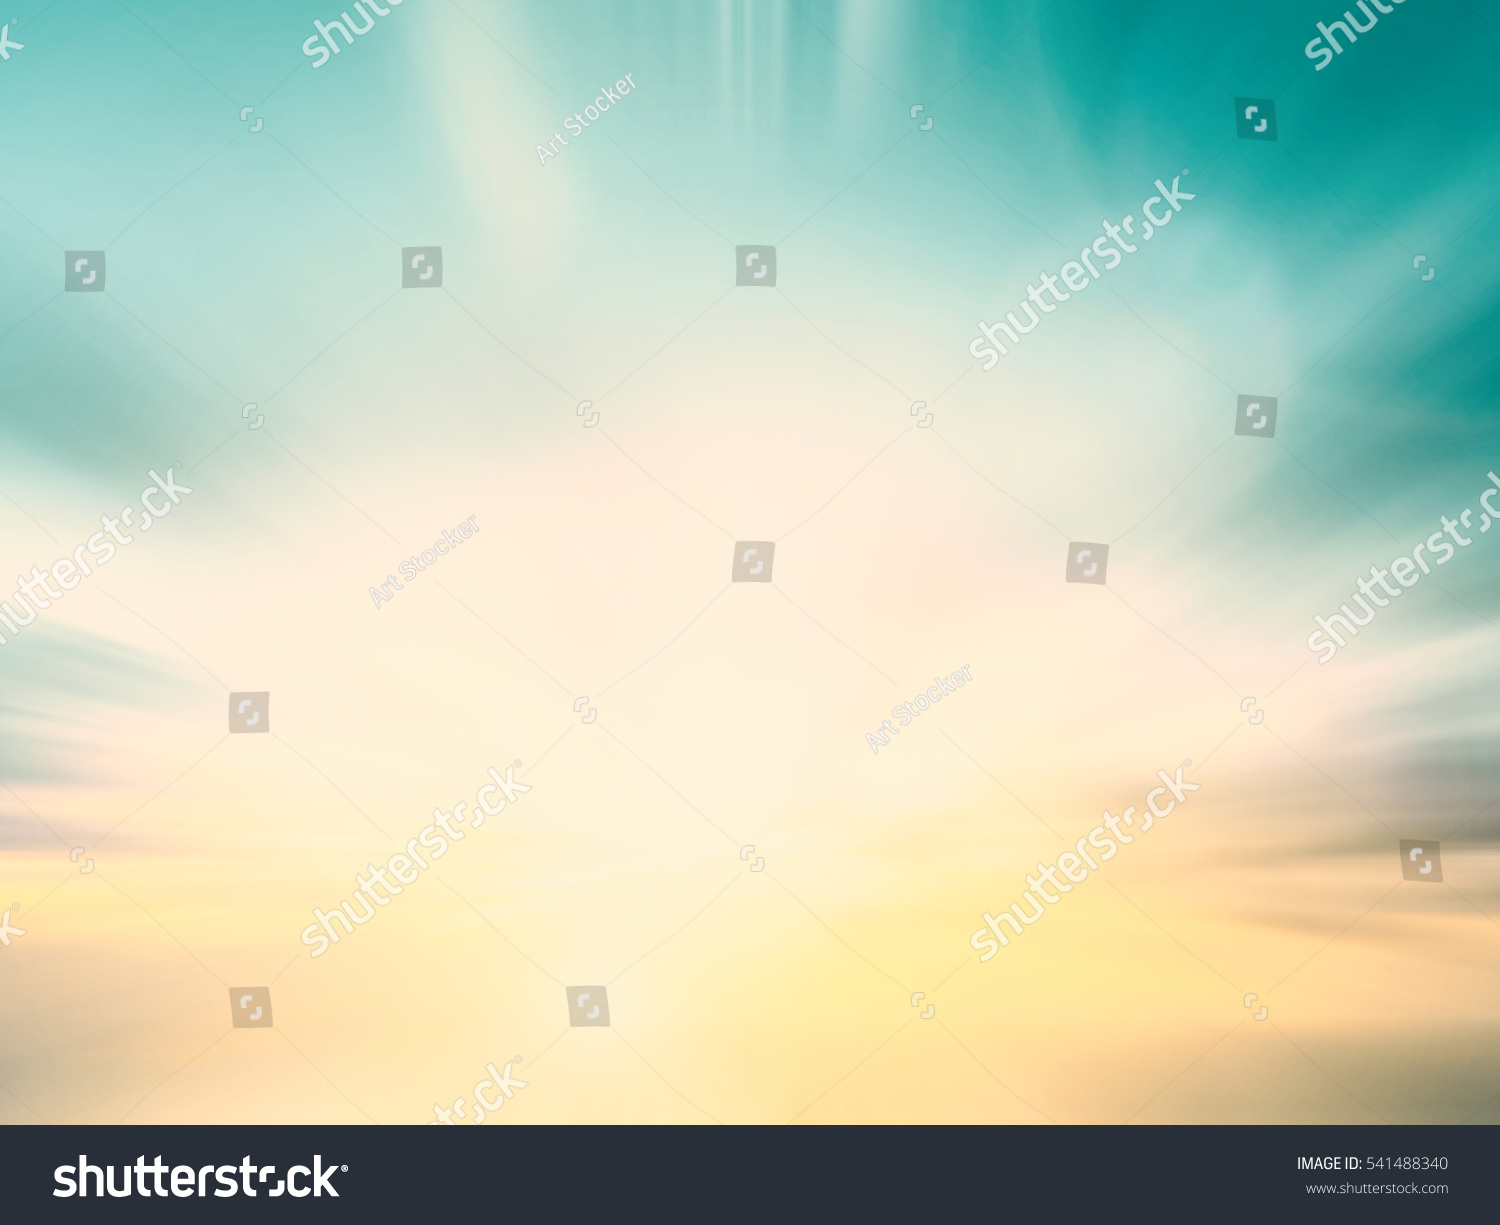 Blur focus peaceful morning blue nature backdrop theme concept for summer peace sunset calendar 2019 background, hope faith love in holy spirit religion pattern, Lively in spring event 2018 wallpaper. #541488340